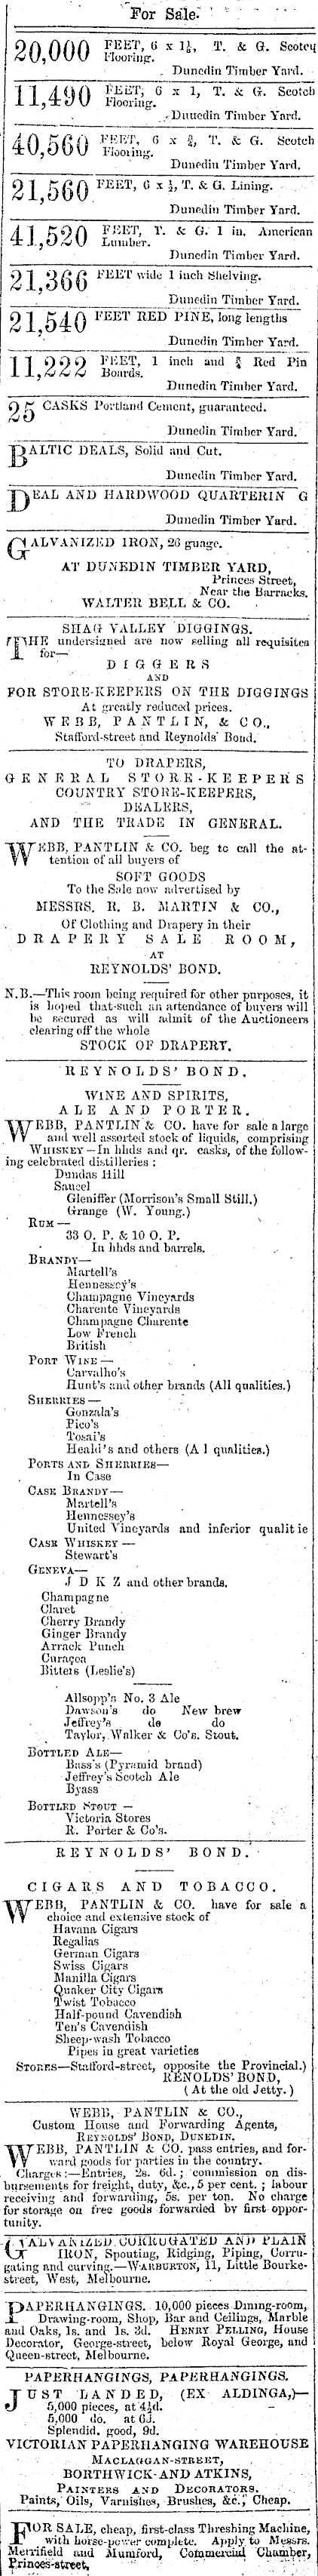 Papers Past Newspapers Otago Daily Times 30 May 1862 Page 7 Advertisements Column 3